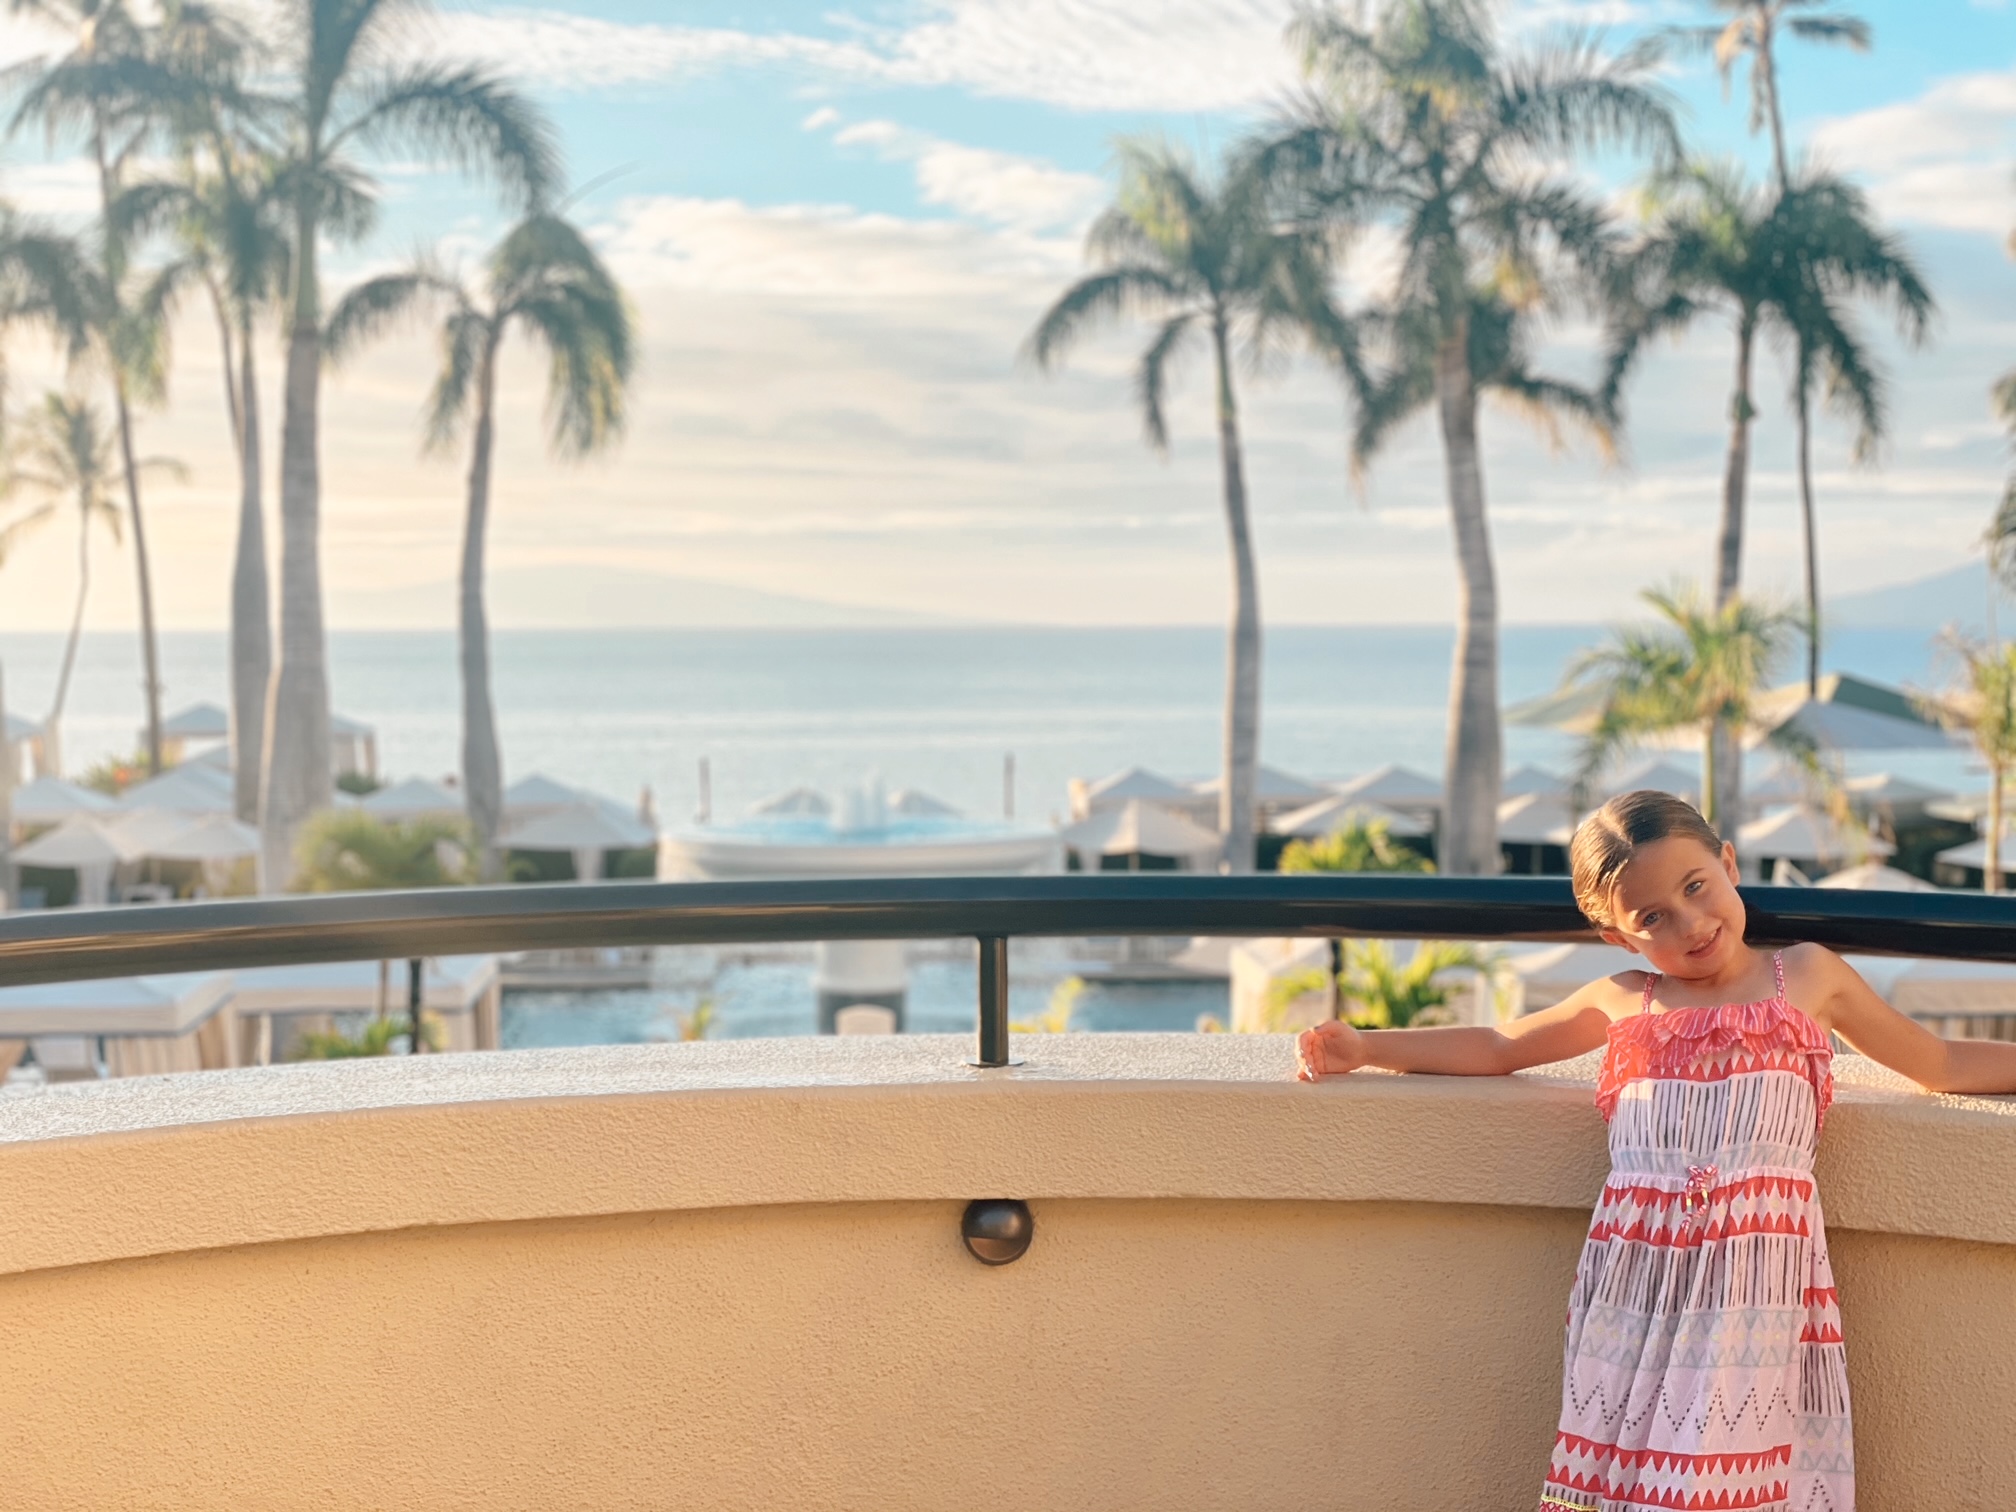 Sophie standing on a balcony at the Four Seasons Resort in Maui.